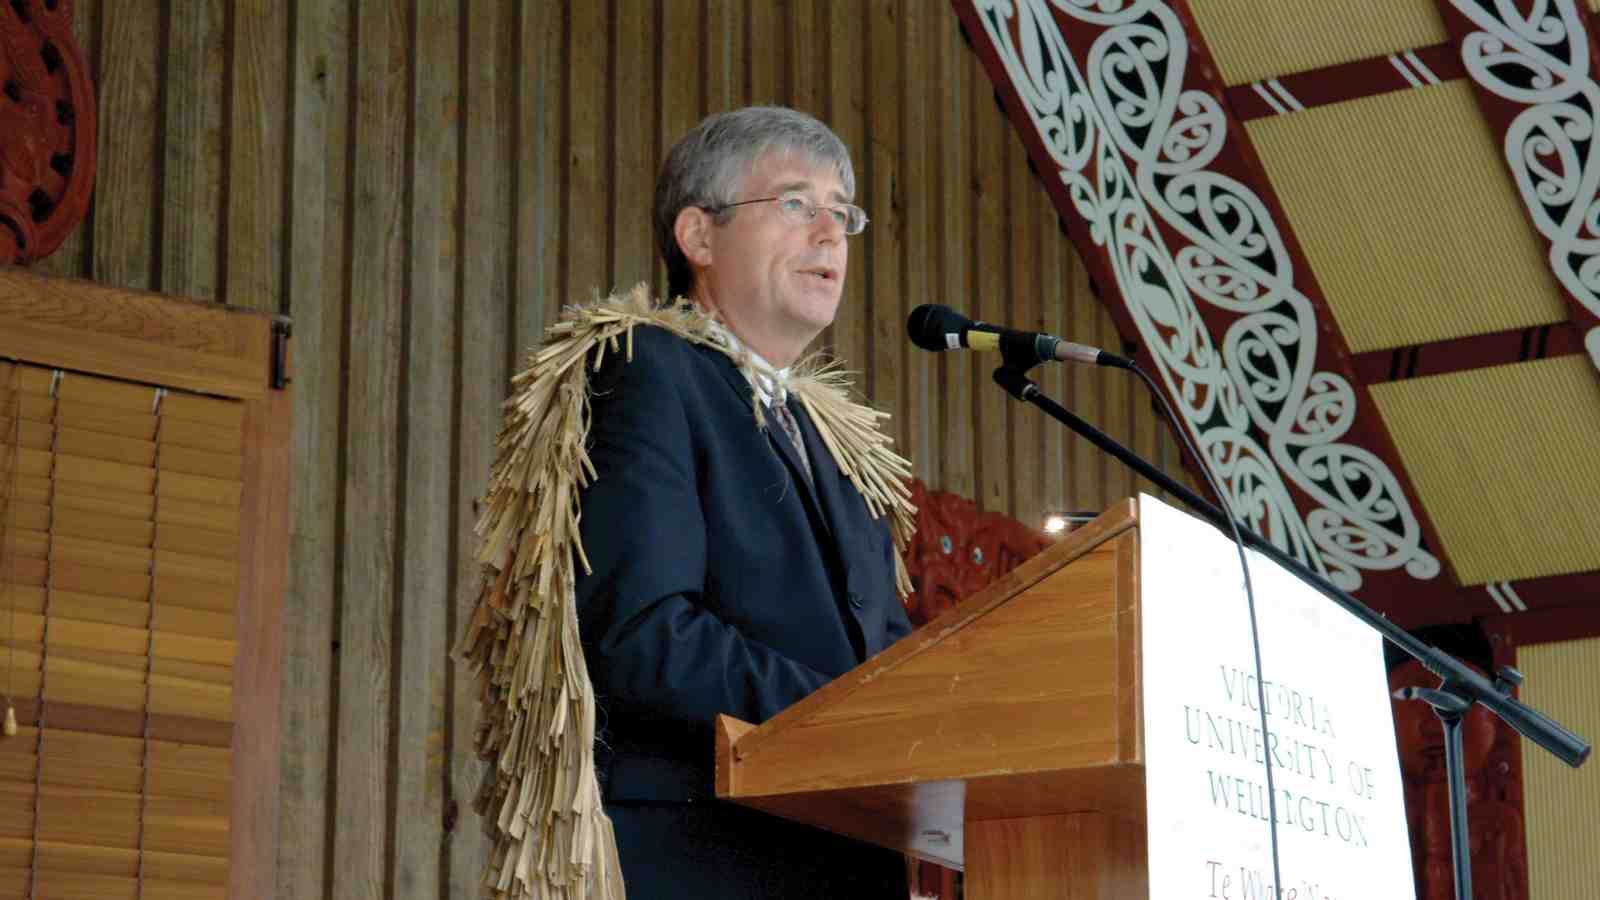 Professor Pat Walsh speaks at the pōwhiri held to welcome him to Victoria.